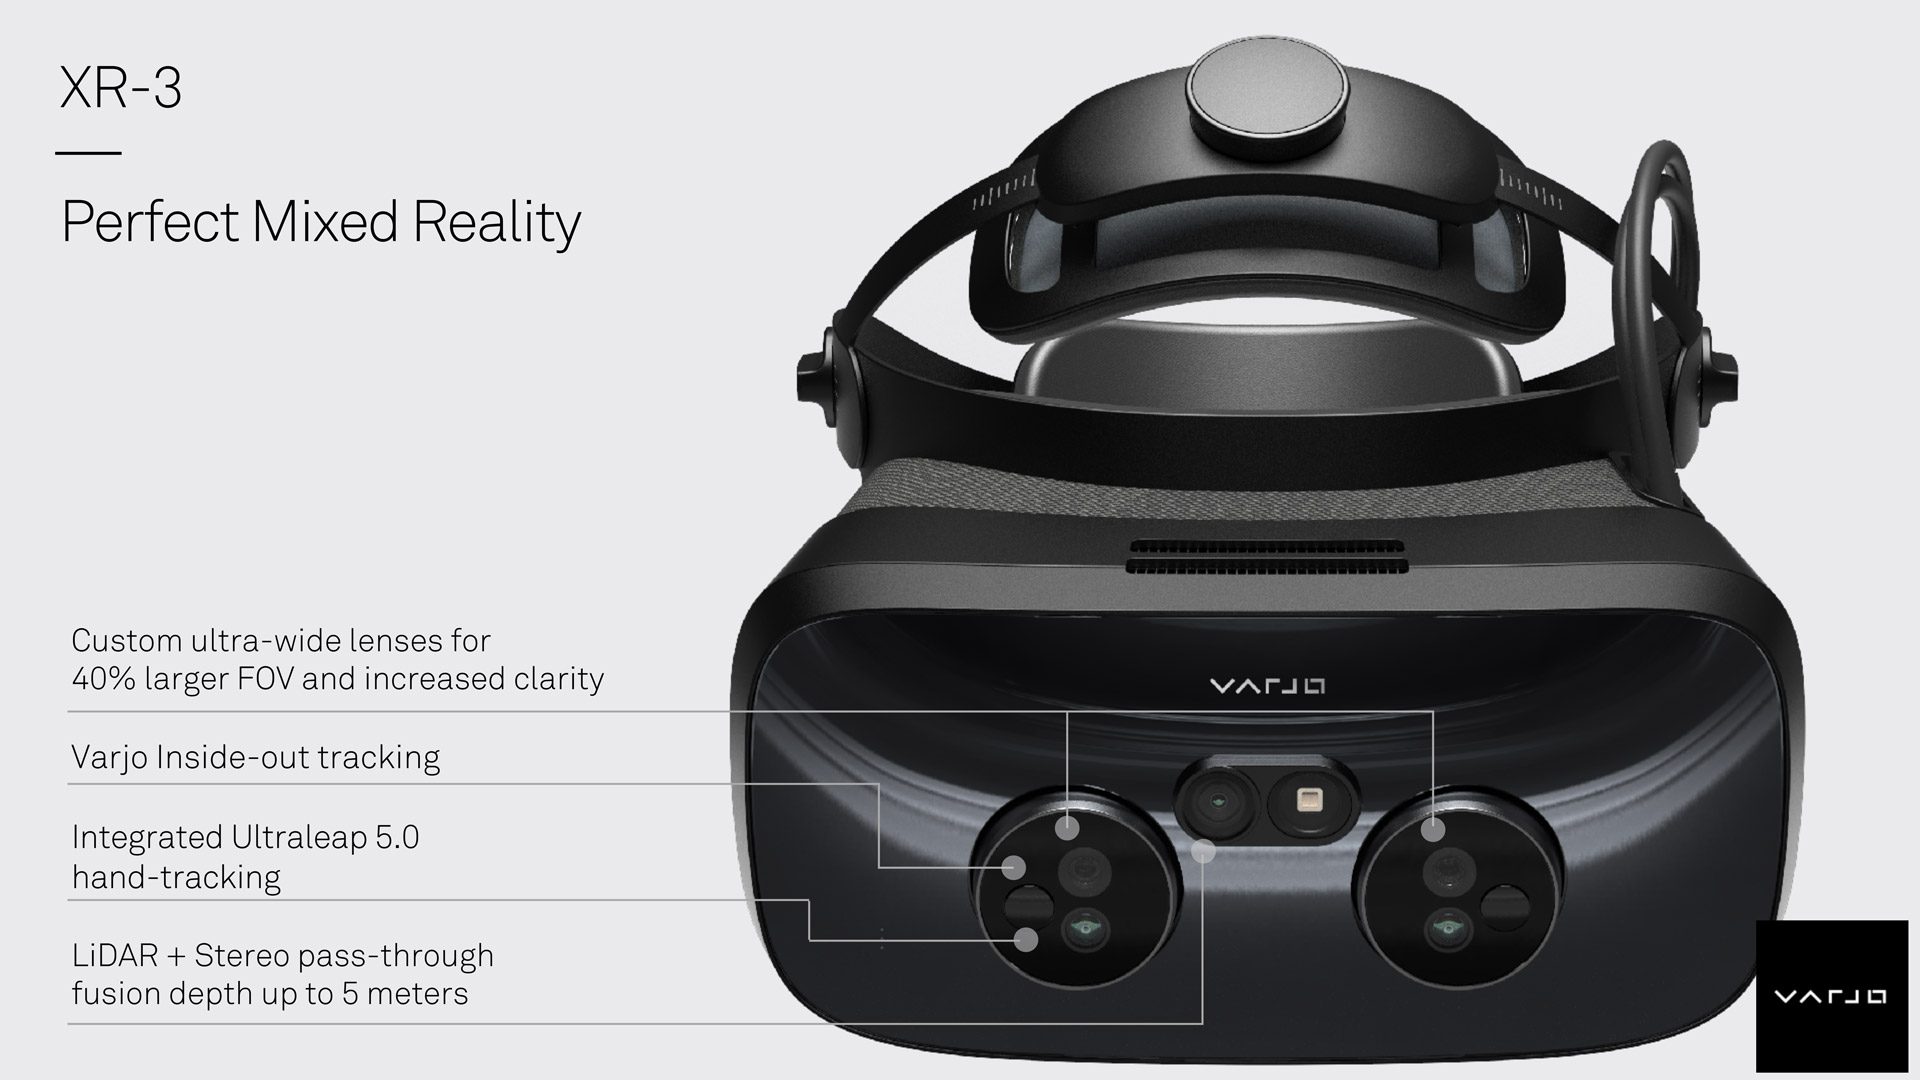 Varjo Announces XR-3 and VR-3 Headsets – Specs, Price, Release Date